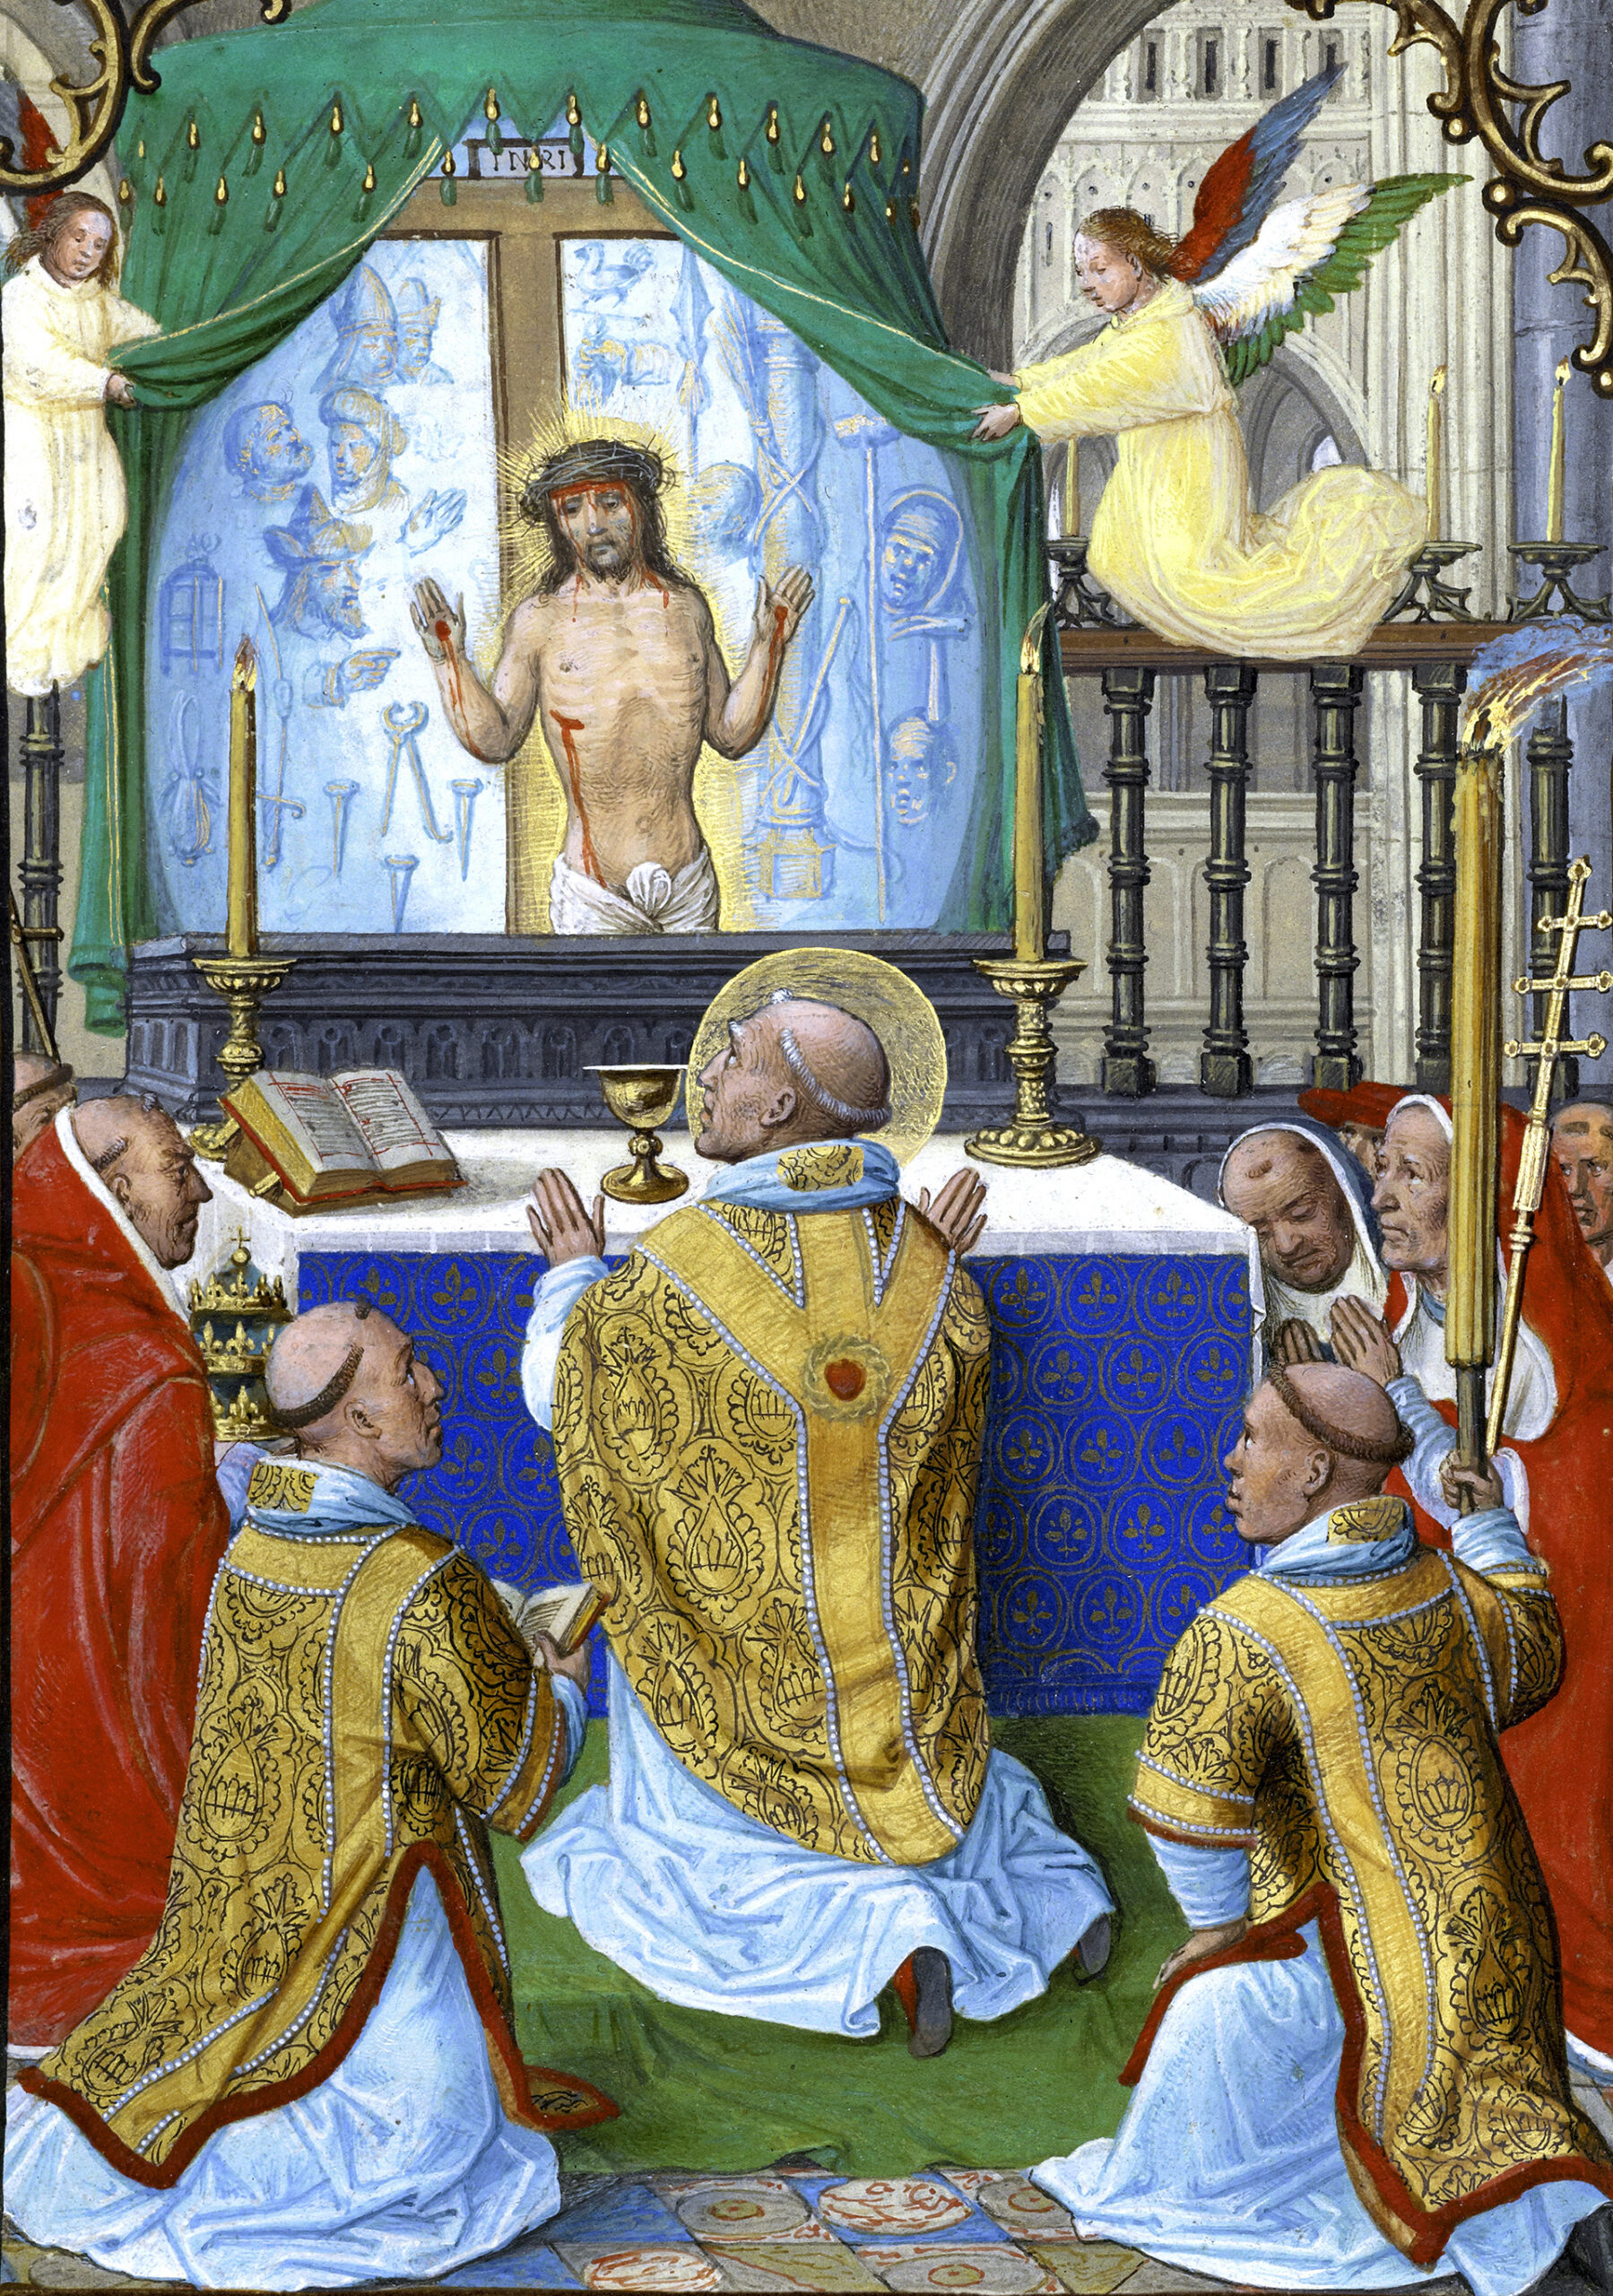 The Mass of Saint Gregory